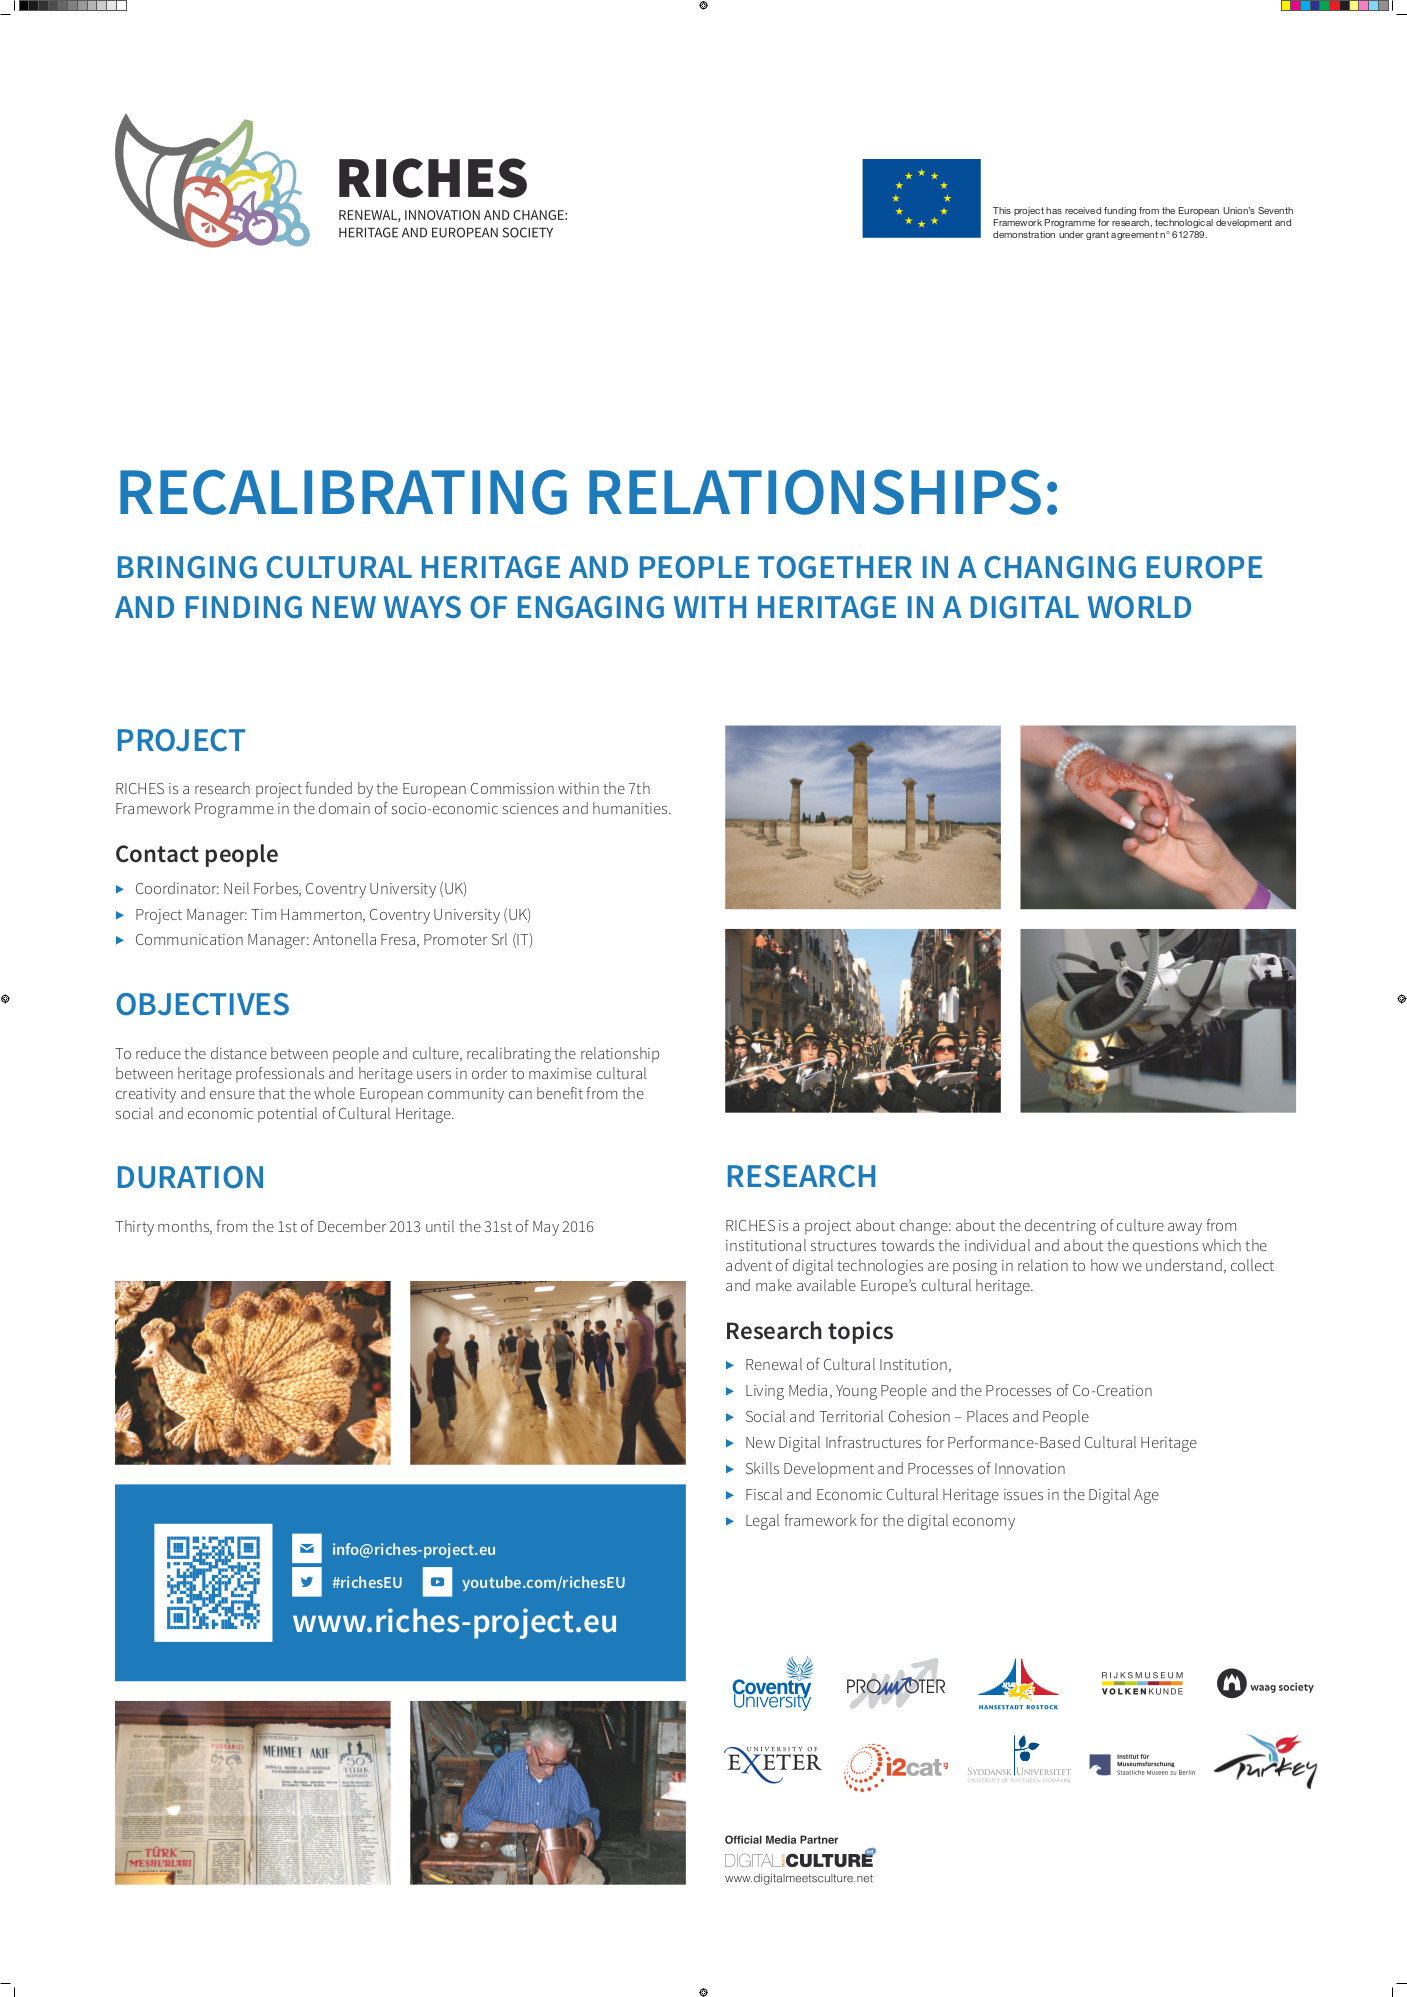 21. RICHES Project: Recalibrating Relationships